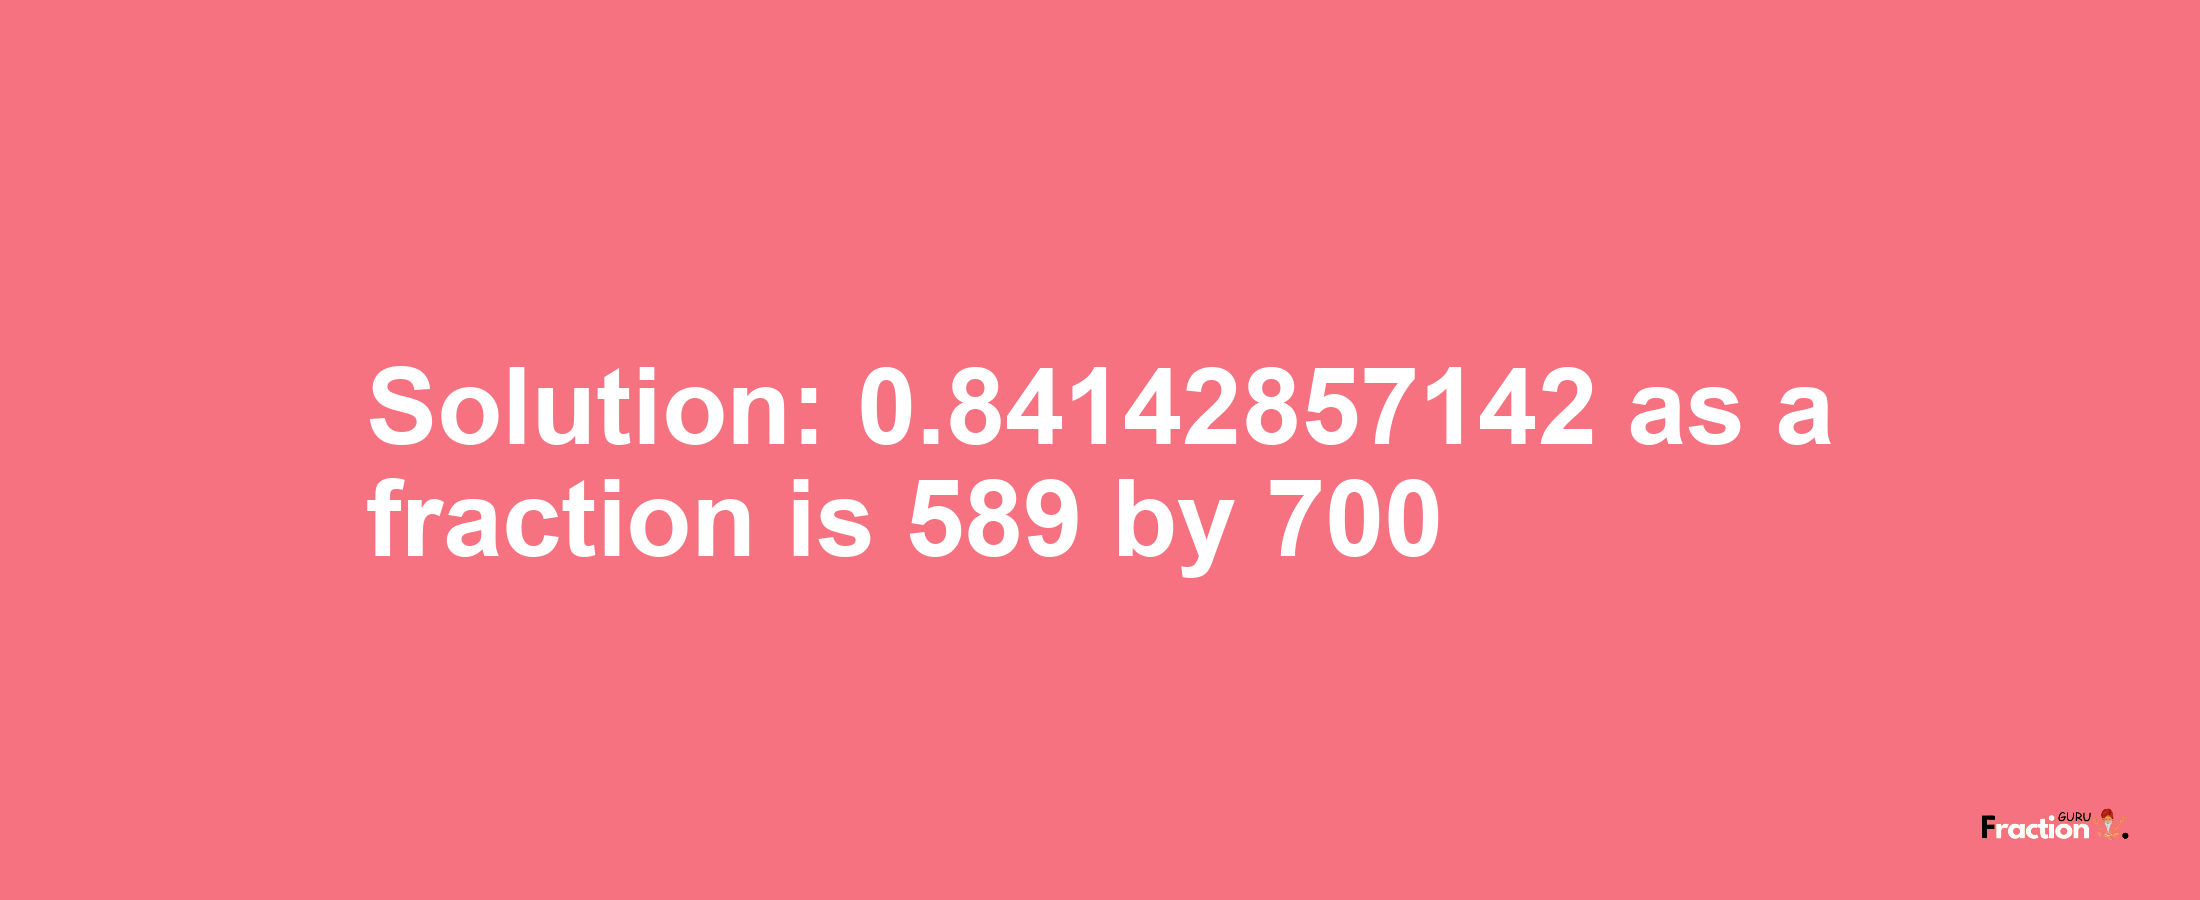 Solution:0.84142857142 as a fraction is 589/700